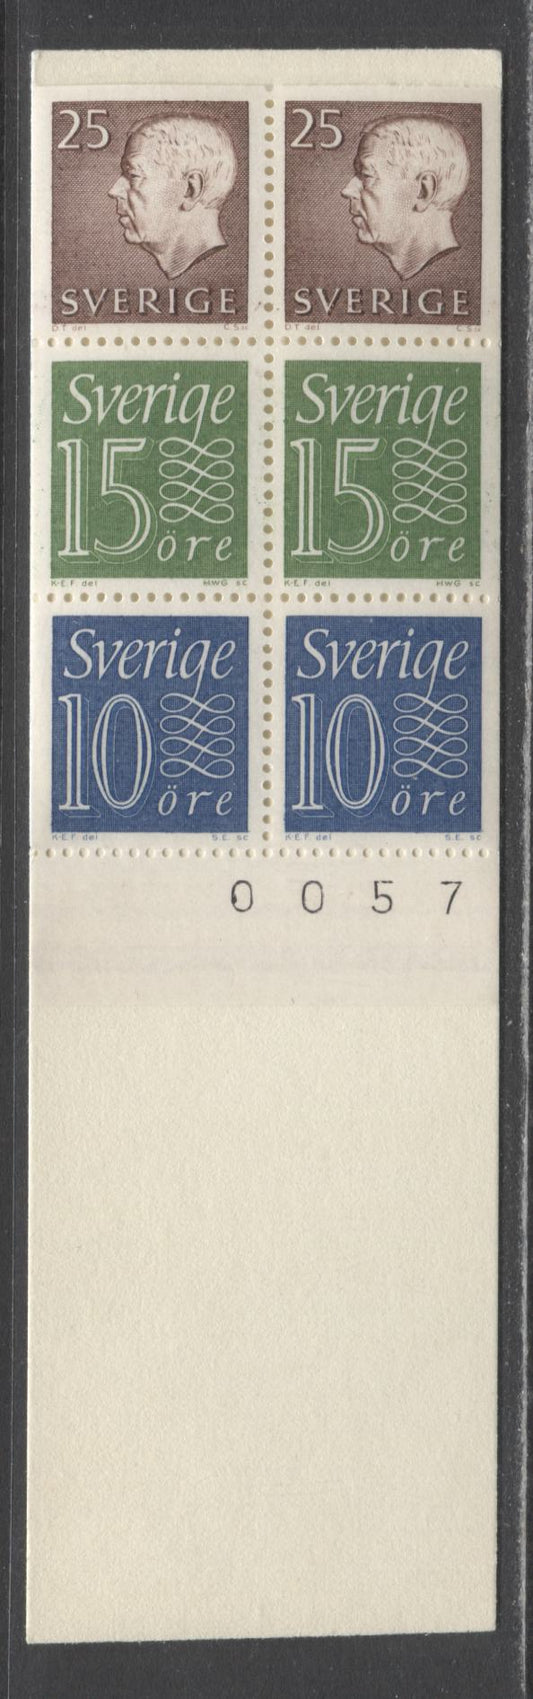 Lot 156 Sweden SC#580a (Facit #HA14A2O) 1965 Re-Engraved King Gustav VI Adolf Definitive Issue, 3-Line Text and Doves Back Cover, Inverted Pane, 4 Digits Of Control Number Visible in Selvedge,  A VFNH Booklet of 6 (2 +2+2), Estimated Value $10